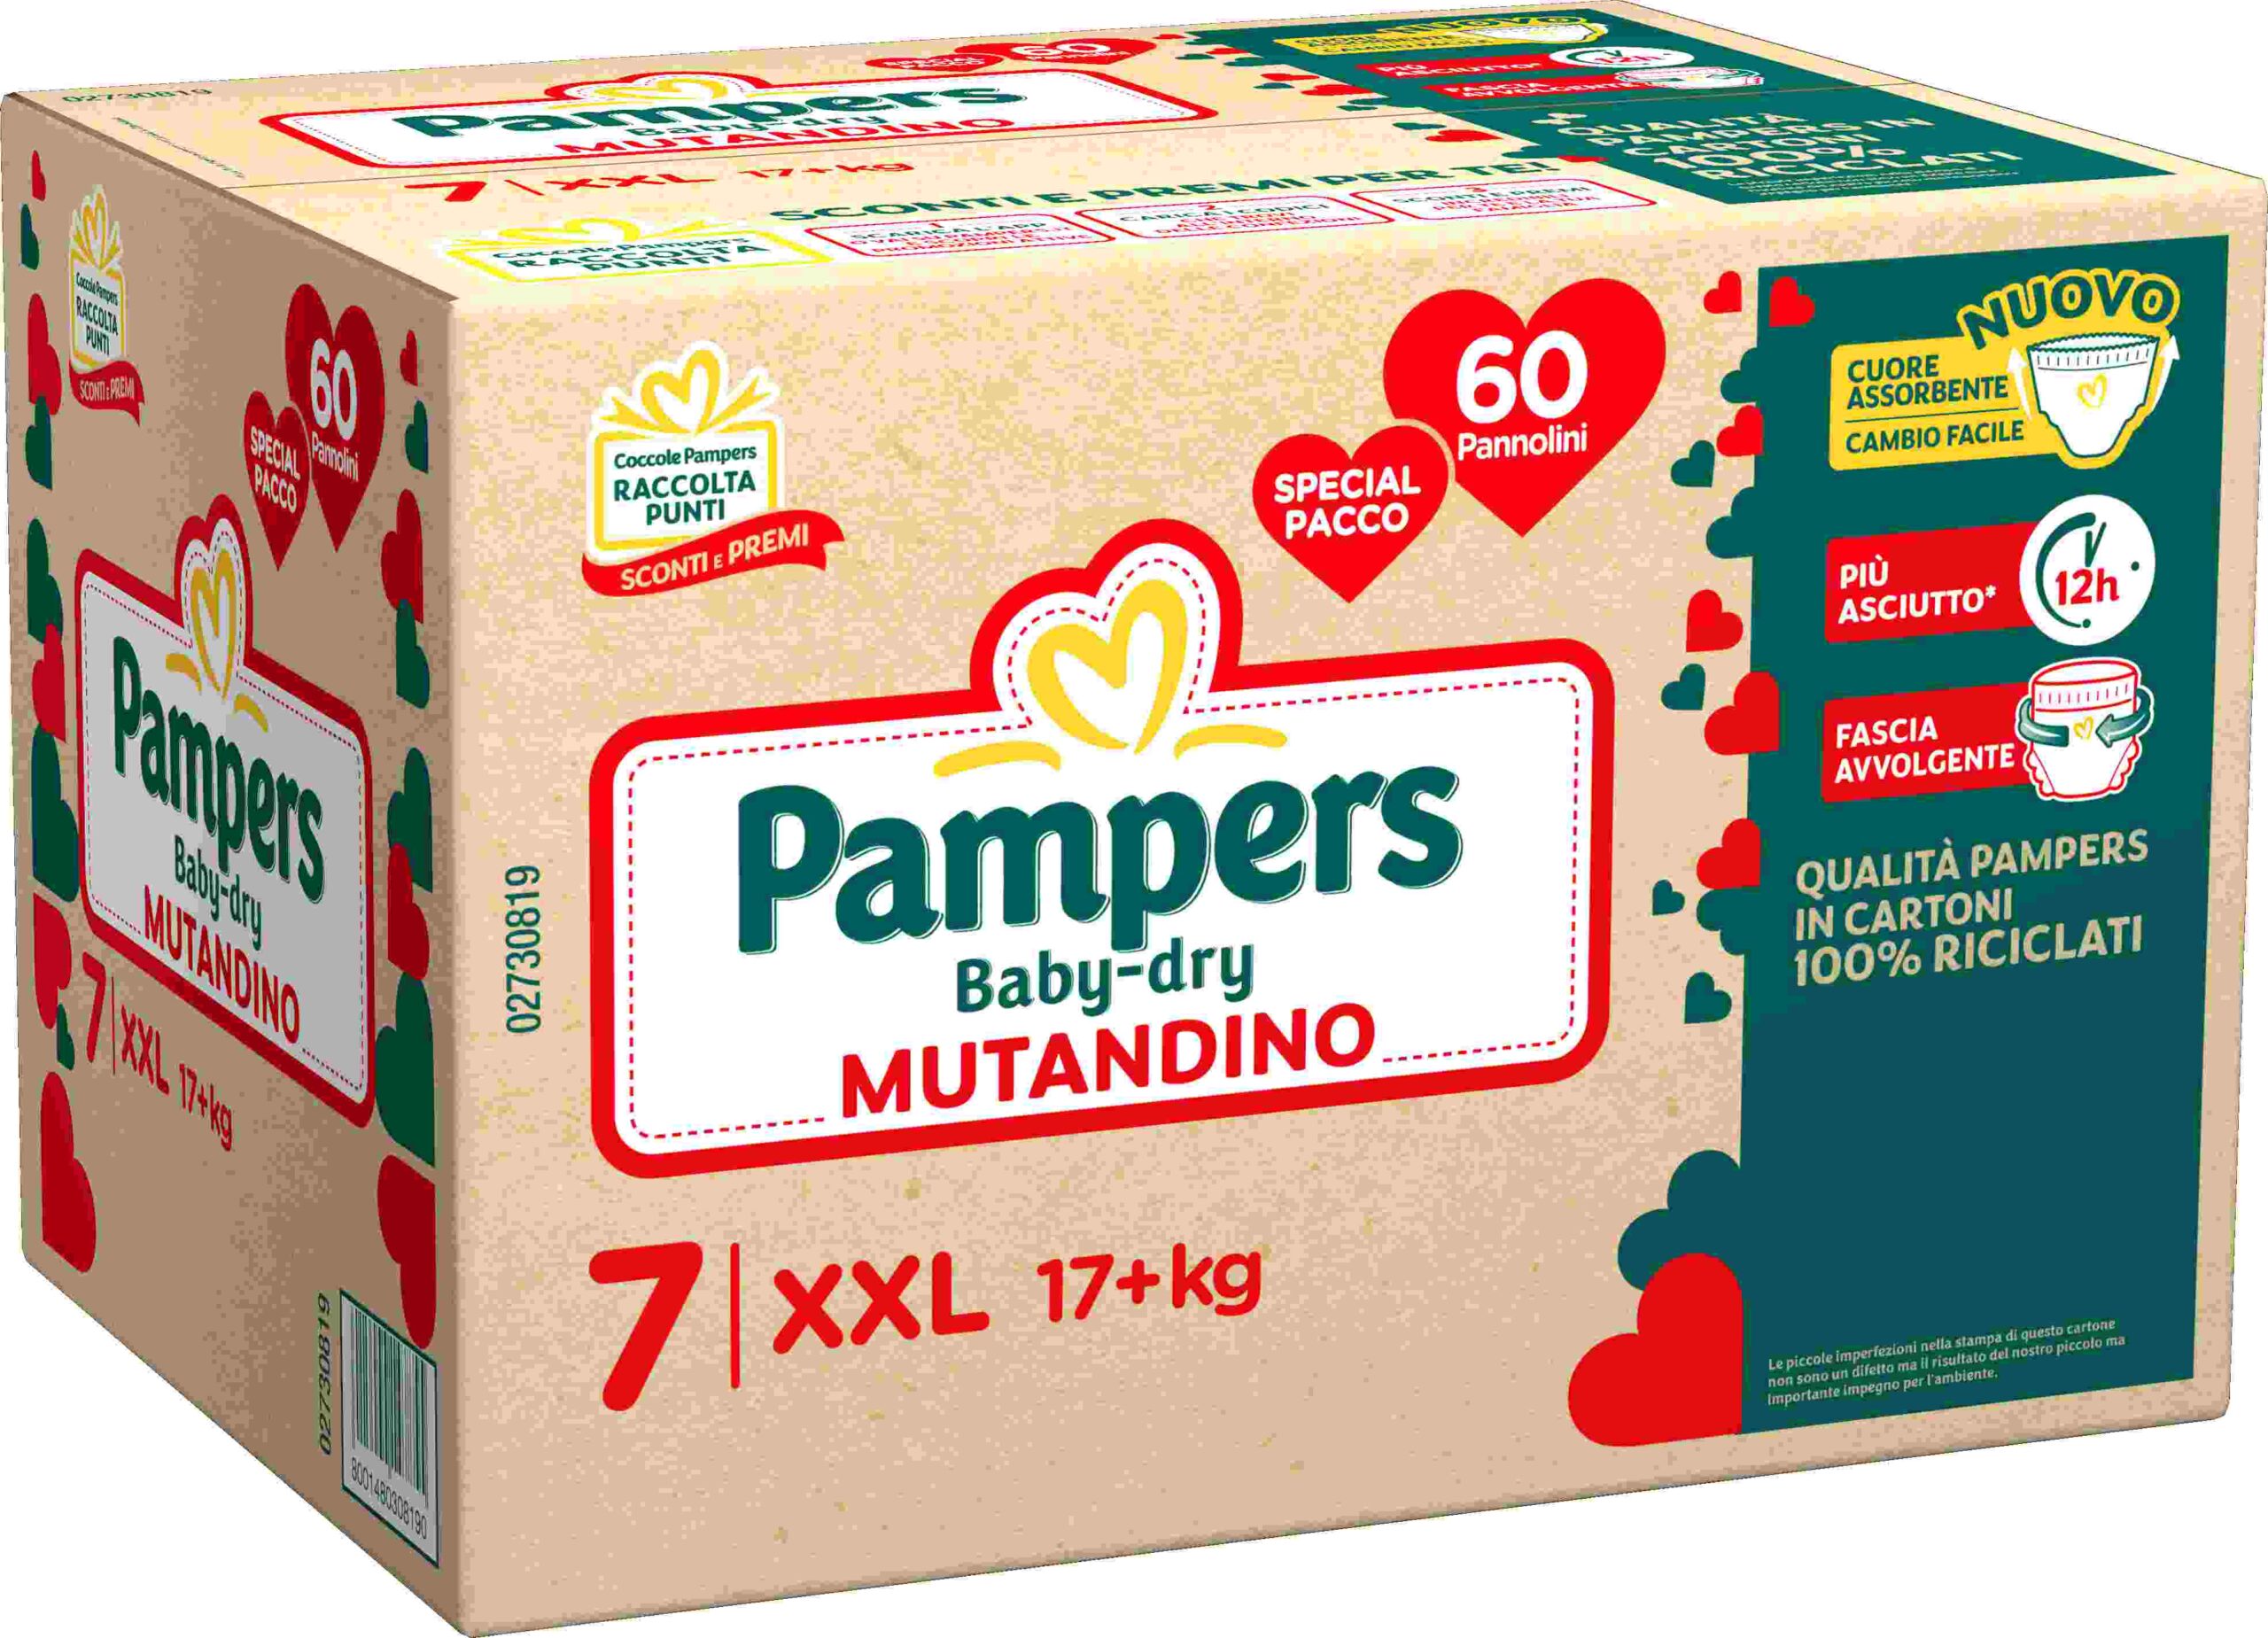 Pampers baby dry mutandino special xxl 60 pz - Pampers